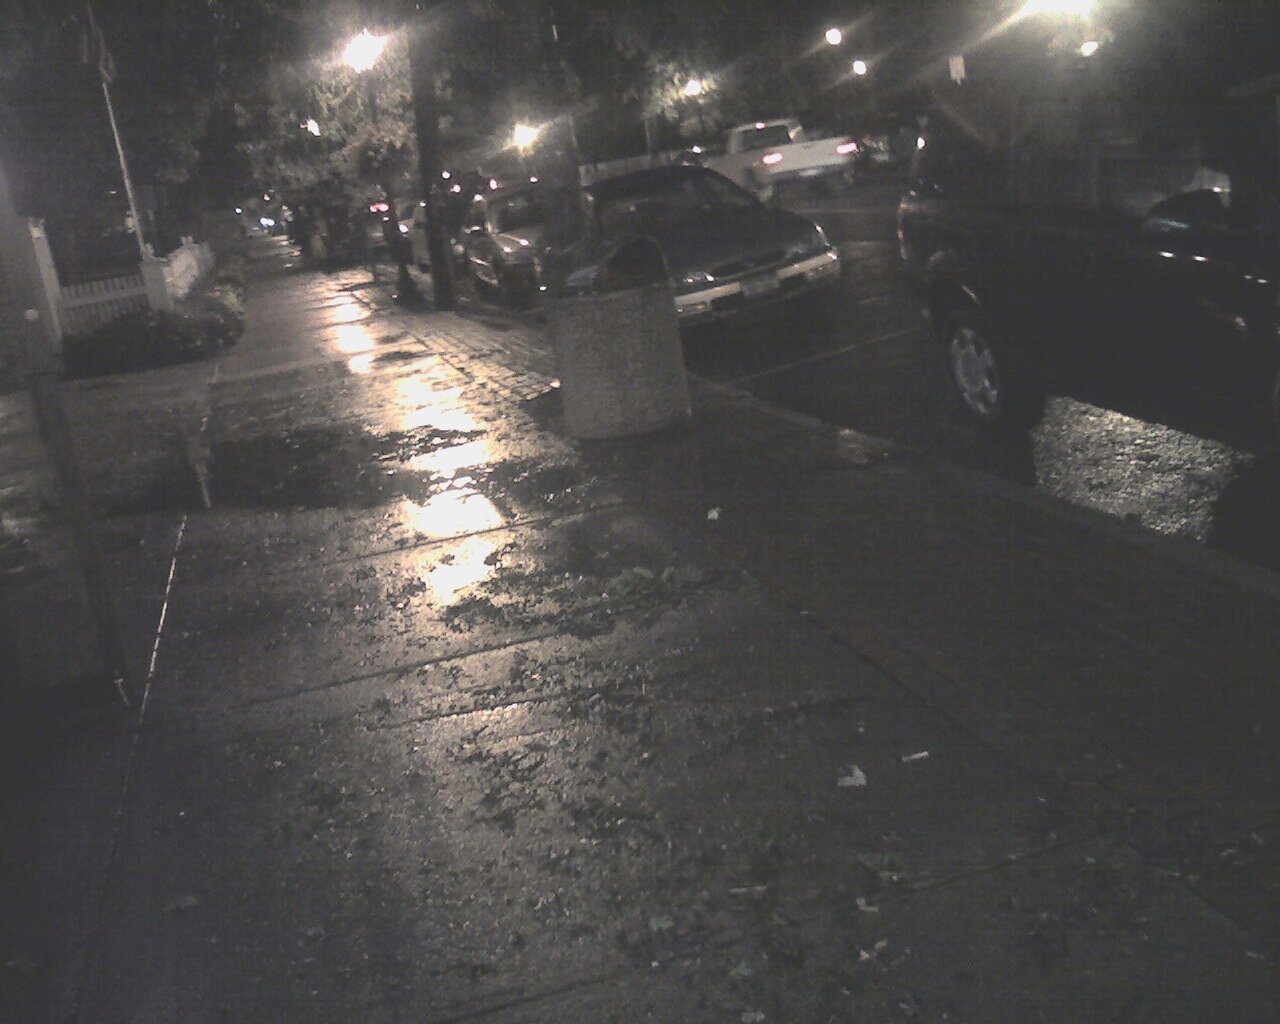 Leaves on sidewalk after the storm, August 2008